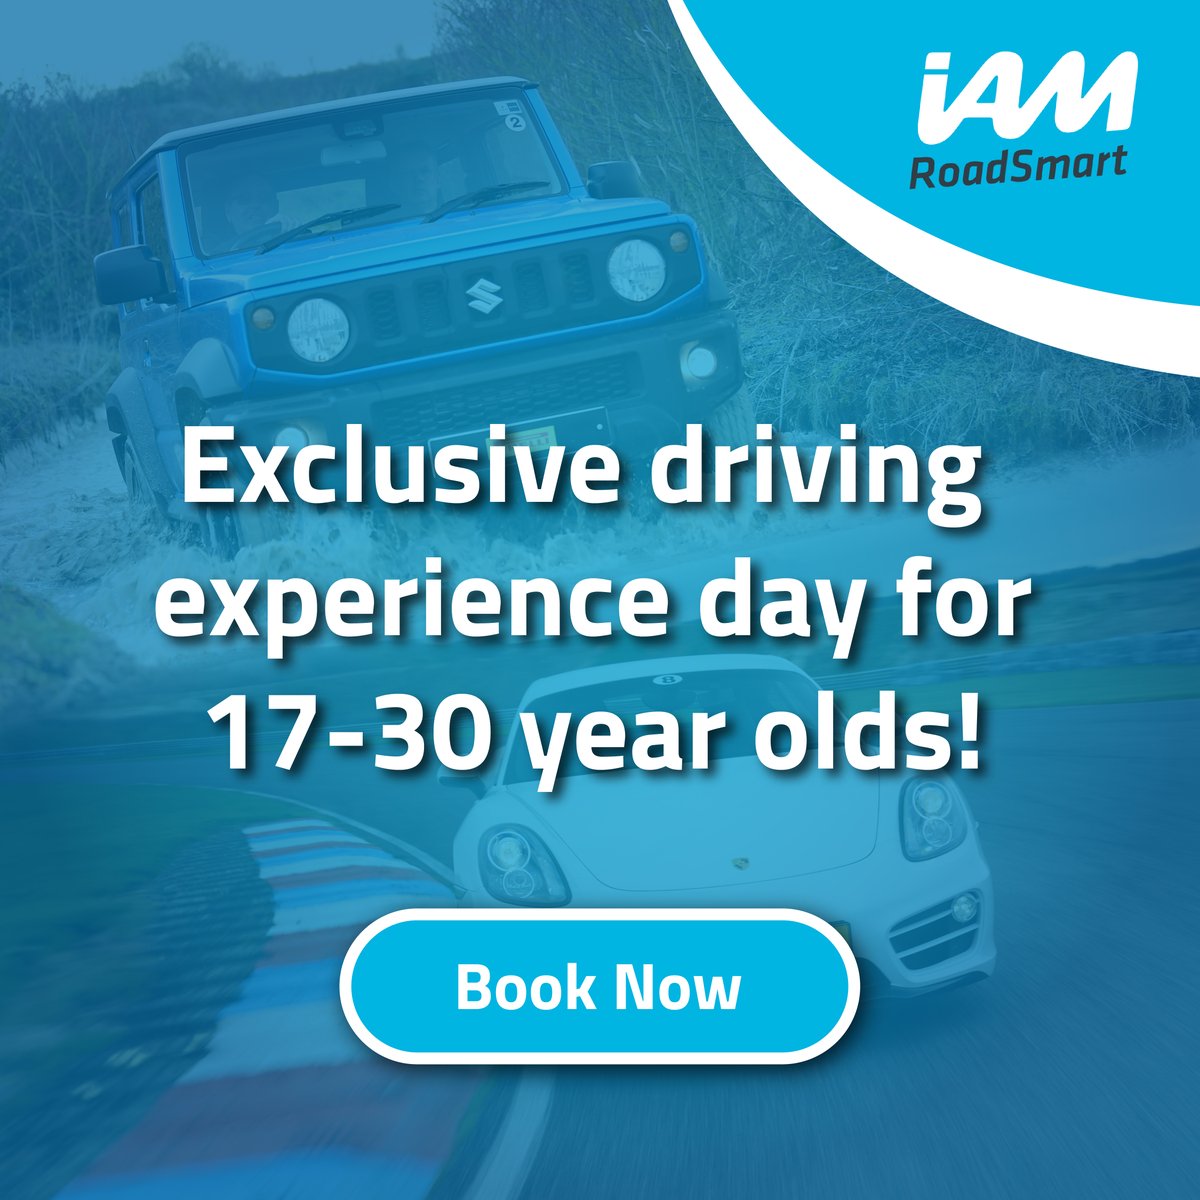 🎟️ Tickets Still Available! 🎟️ Secure your spot at our first Young Driver Skills Day today! Dive into this unique experience designed for 17-30-year-olds to acquire new skills and expand driving knowledge during a thrilling half-day at Thruxton Circuit. iamroadsmart.net/yd-skills-day